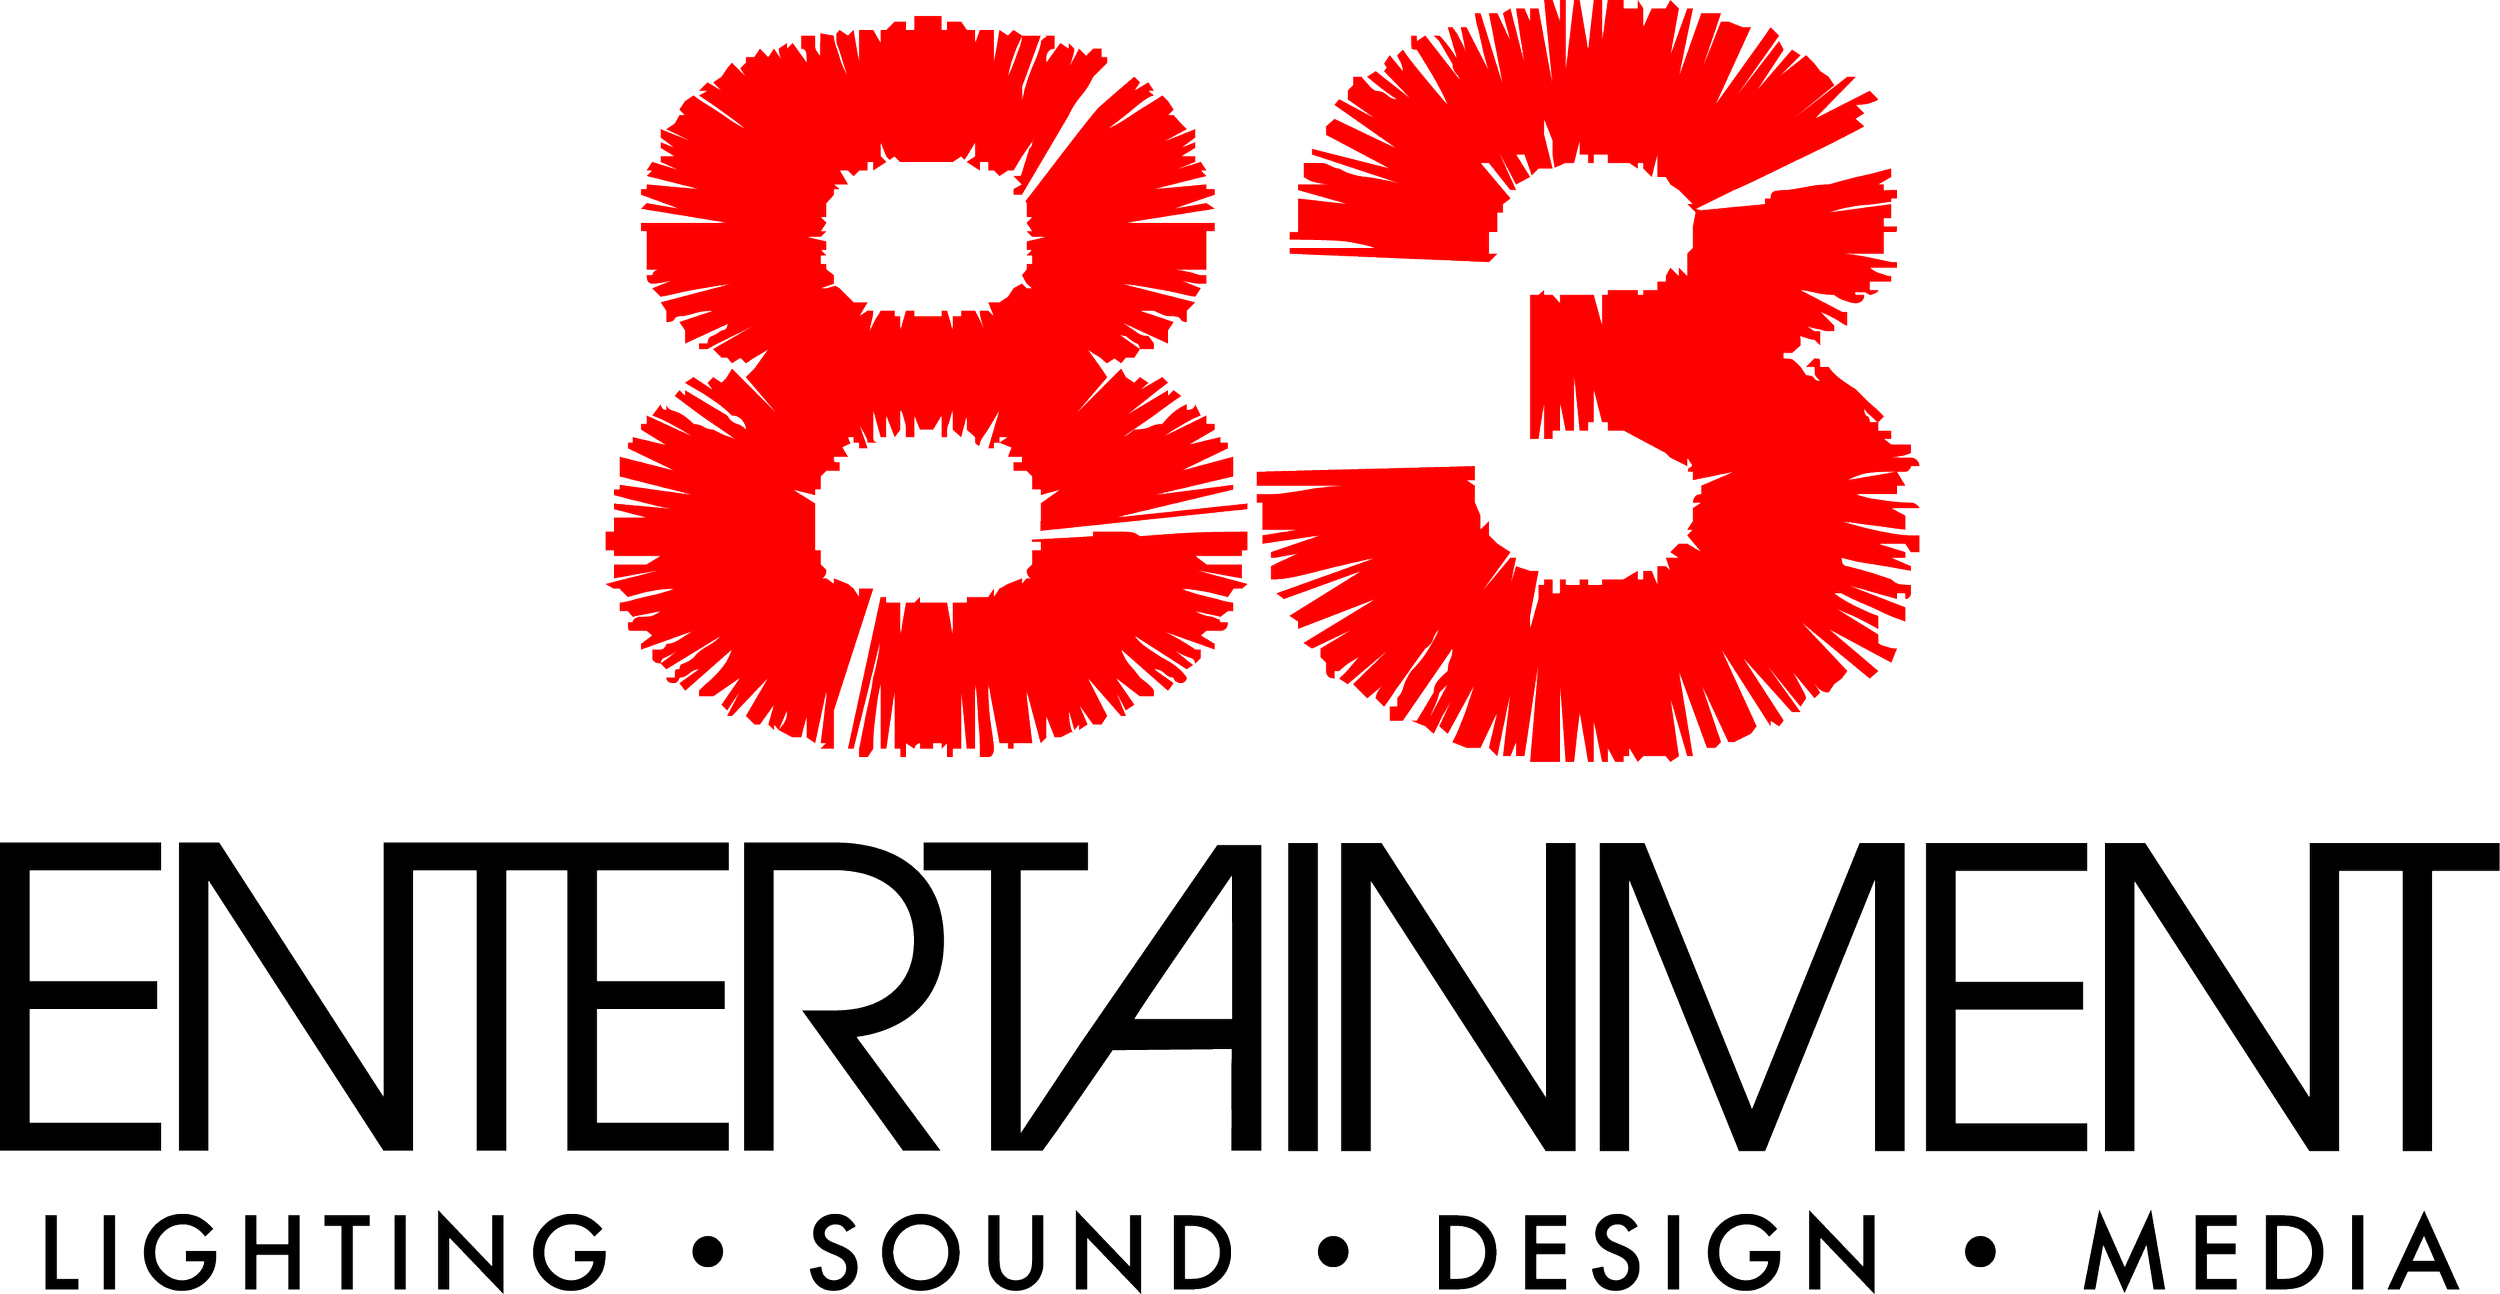 83LOGO no grunge w tag outlines.png